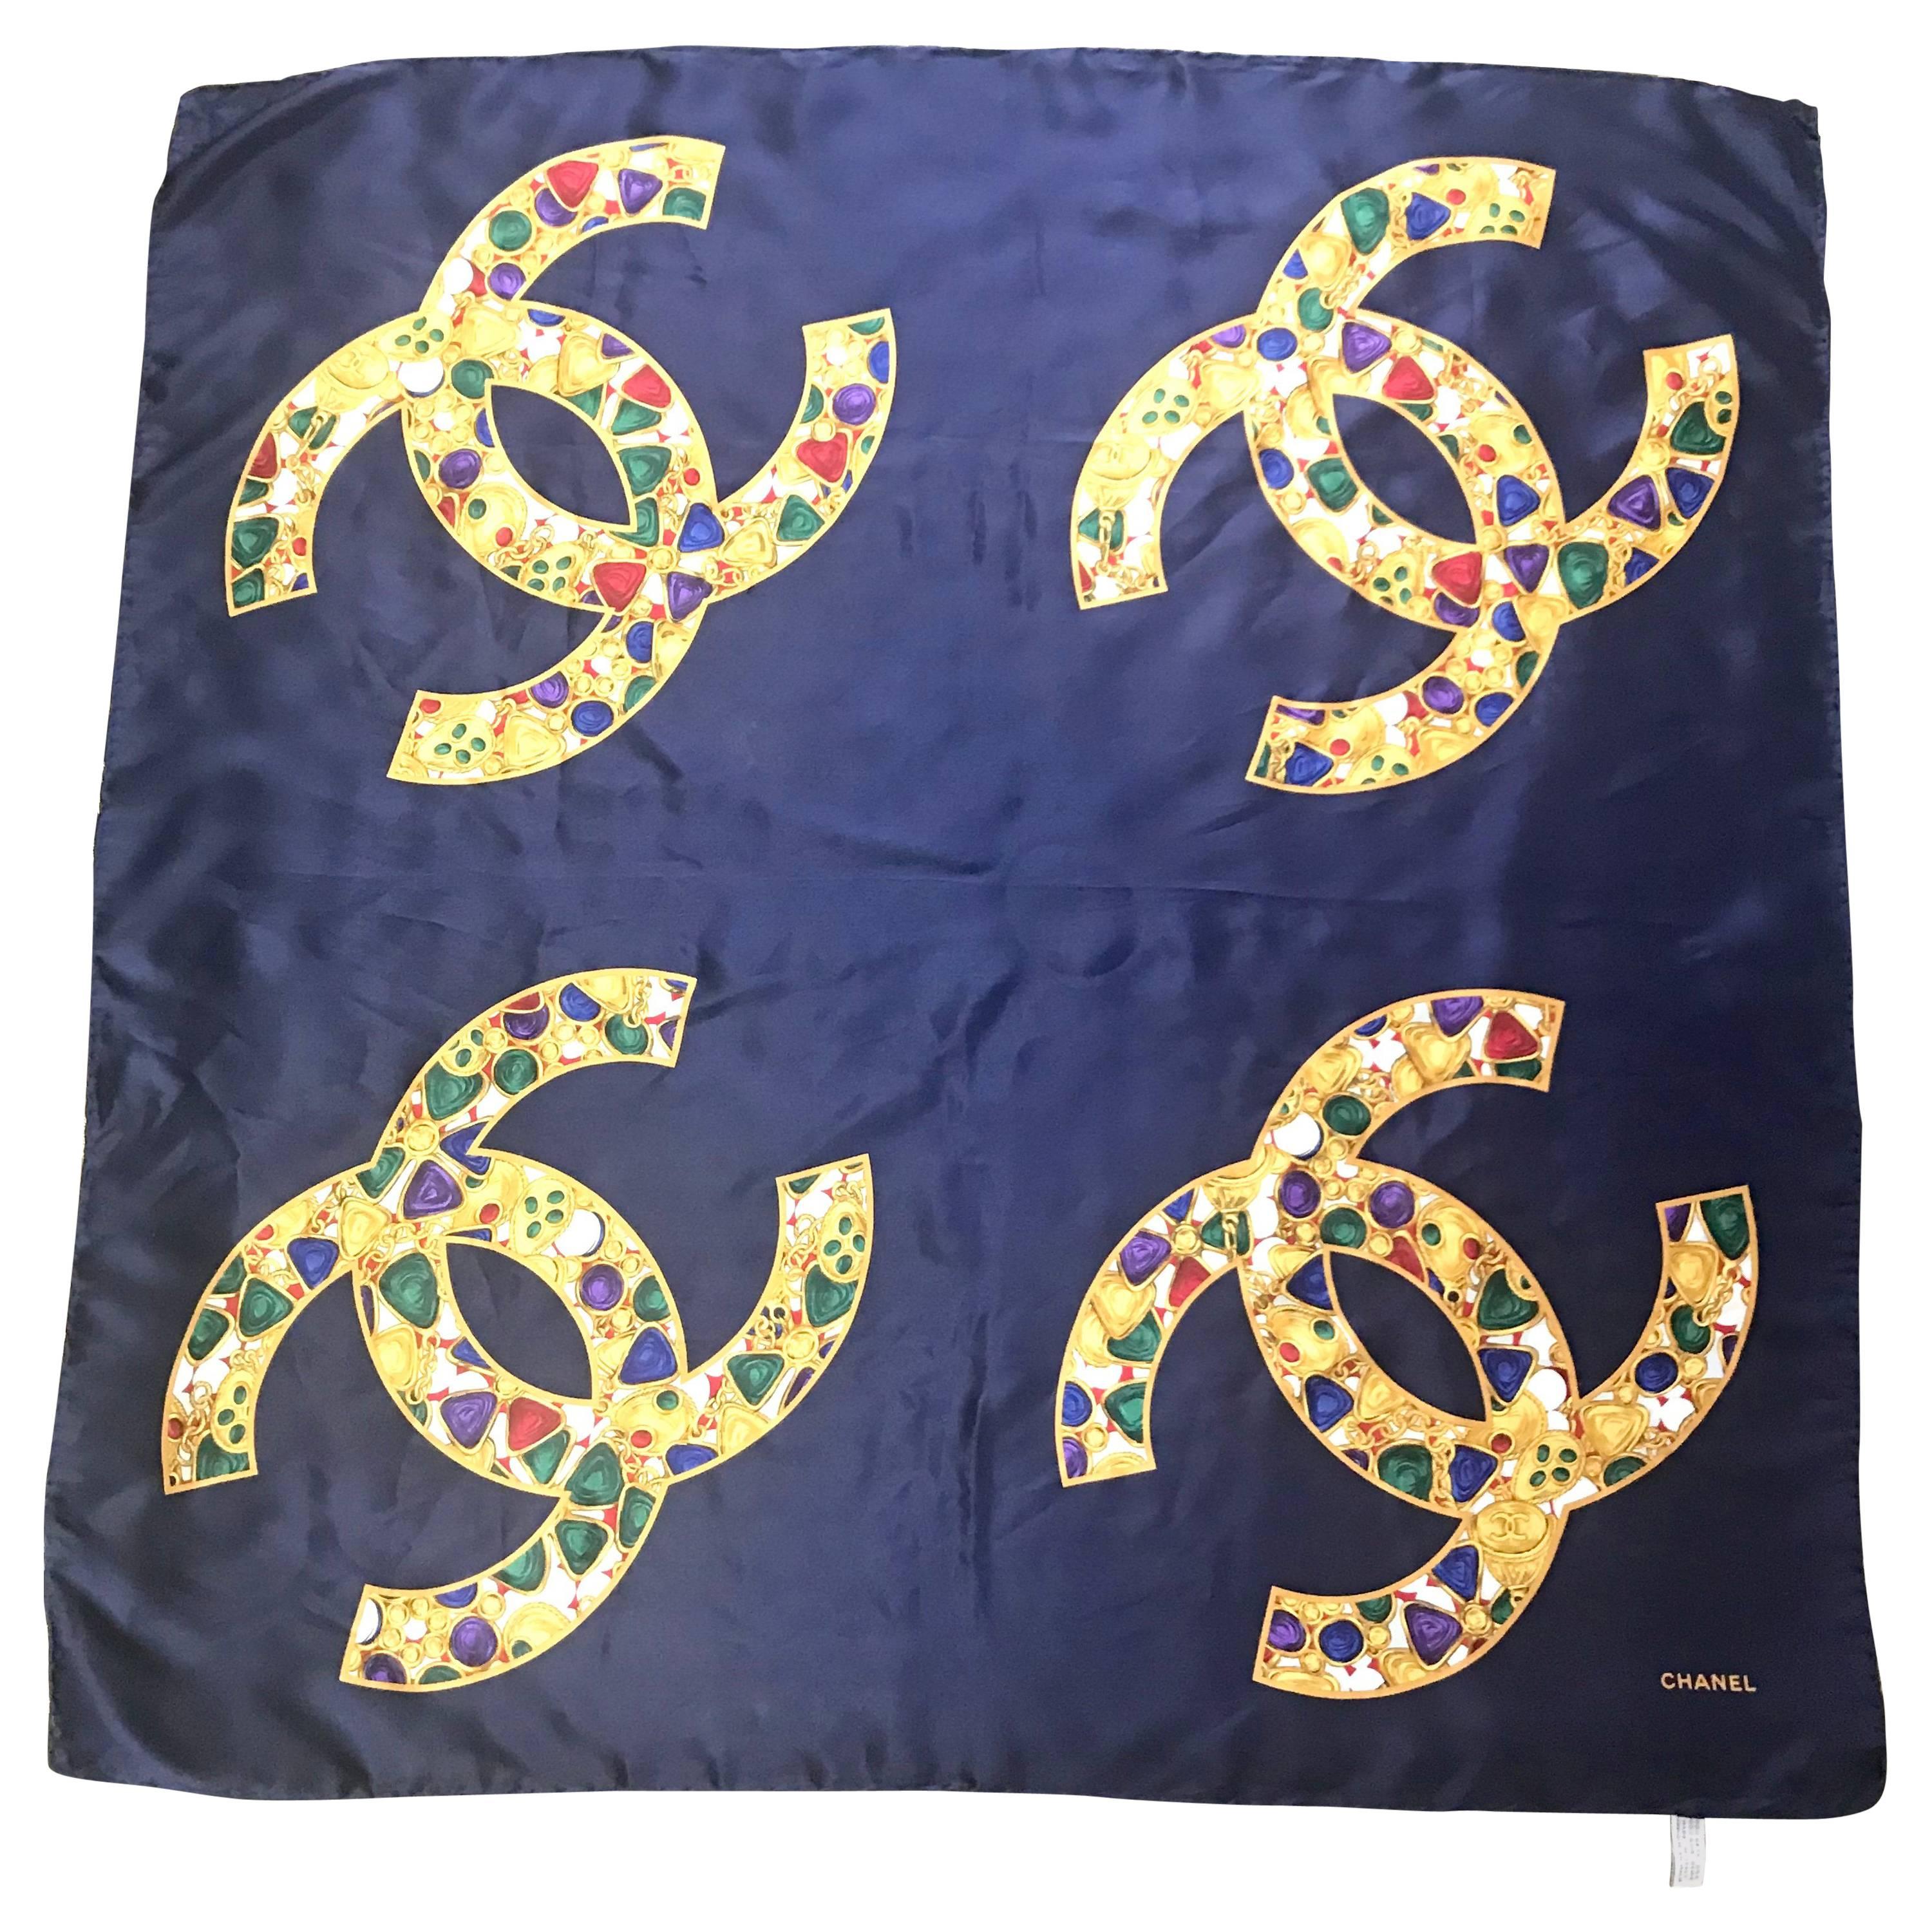 Vintage CHANEL navy silk scarf with gold, red, purple, green jewelry print in CC